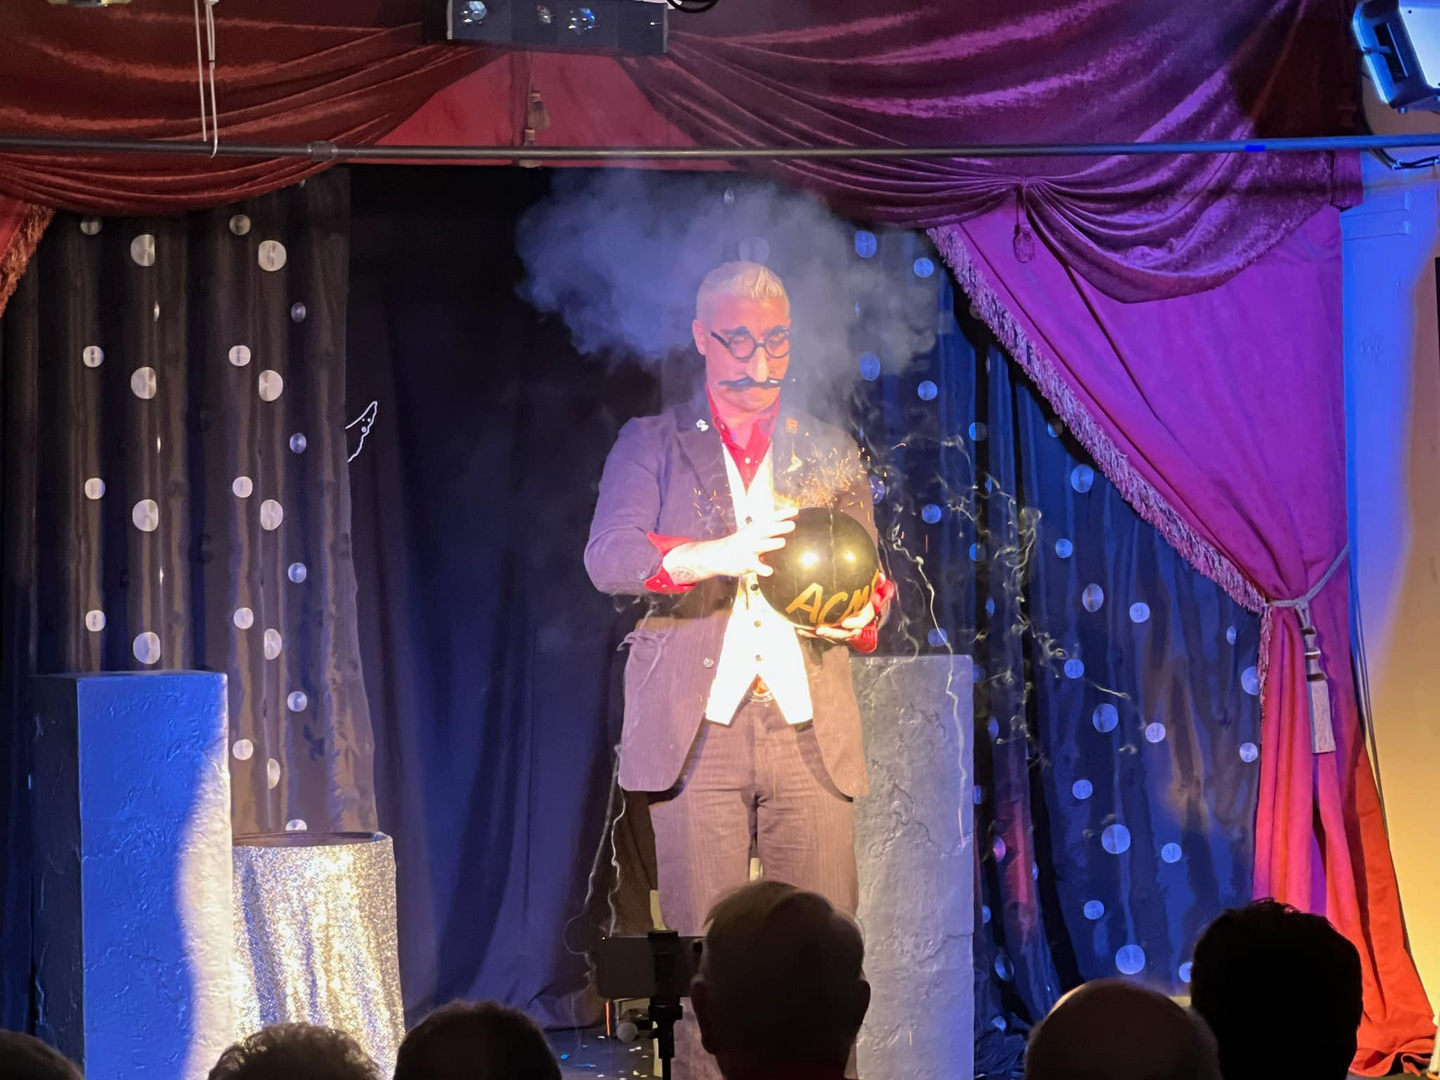 A man in a suit standing on stage with smoke coming out of his mouth.